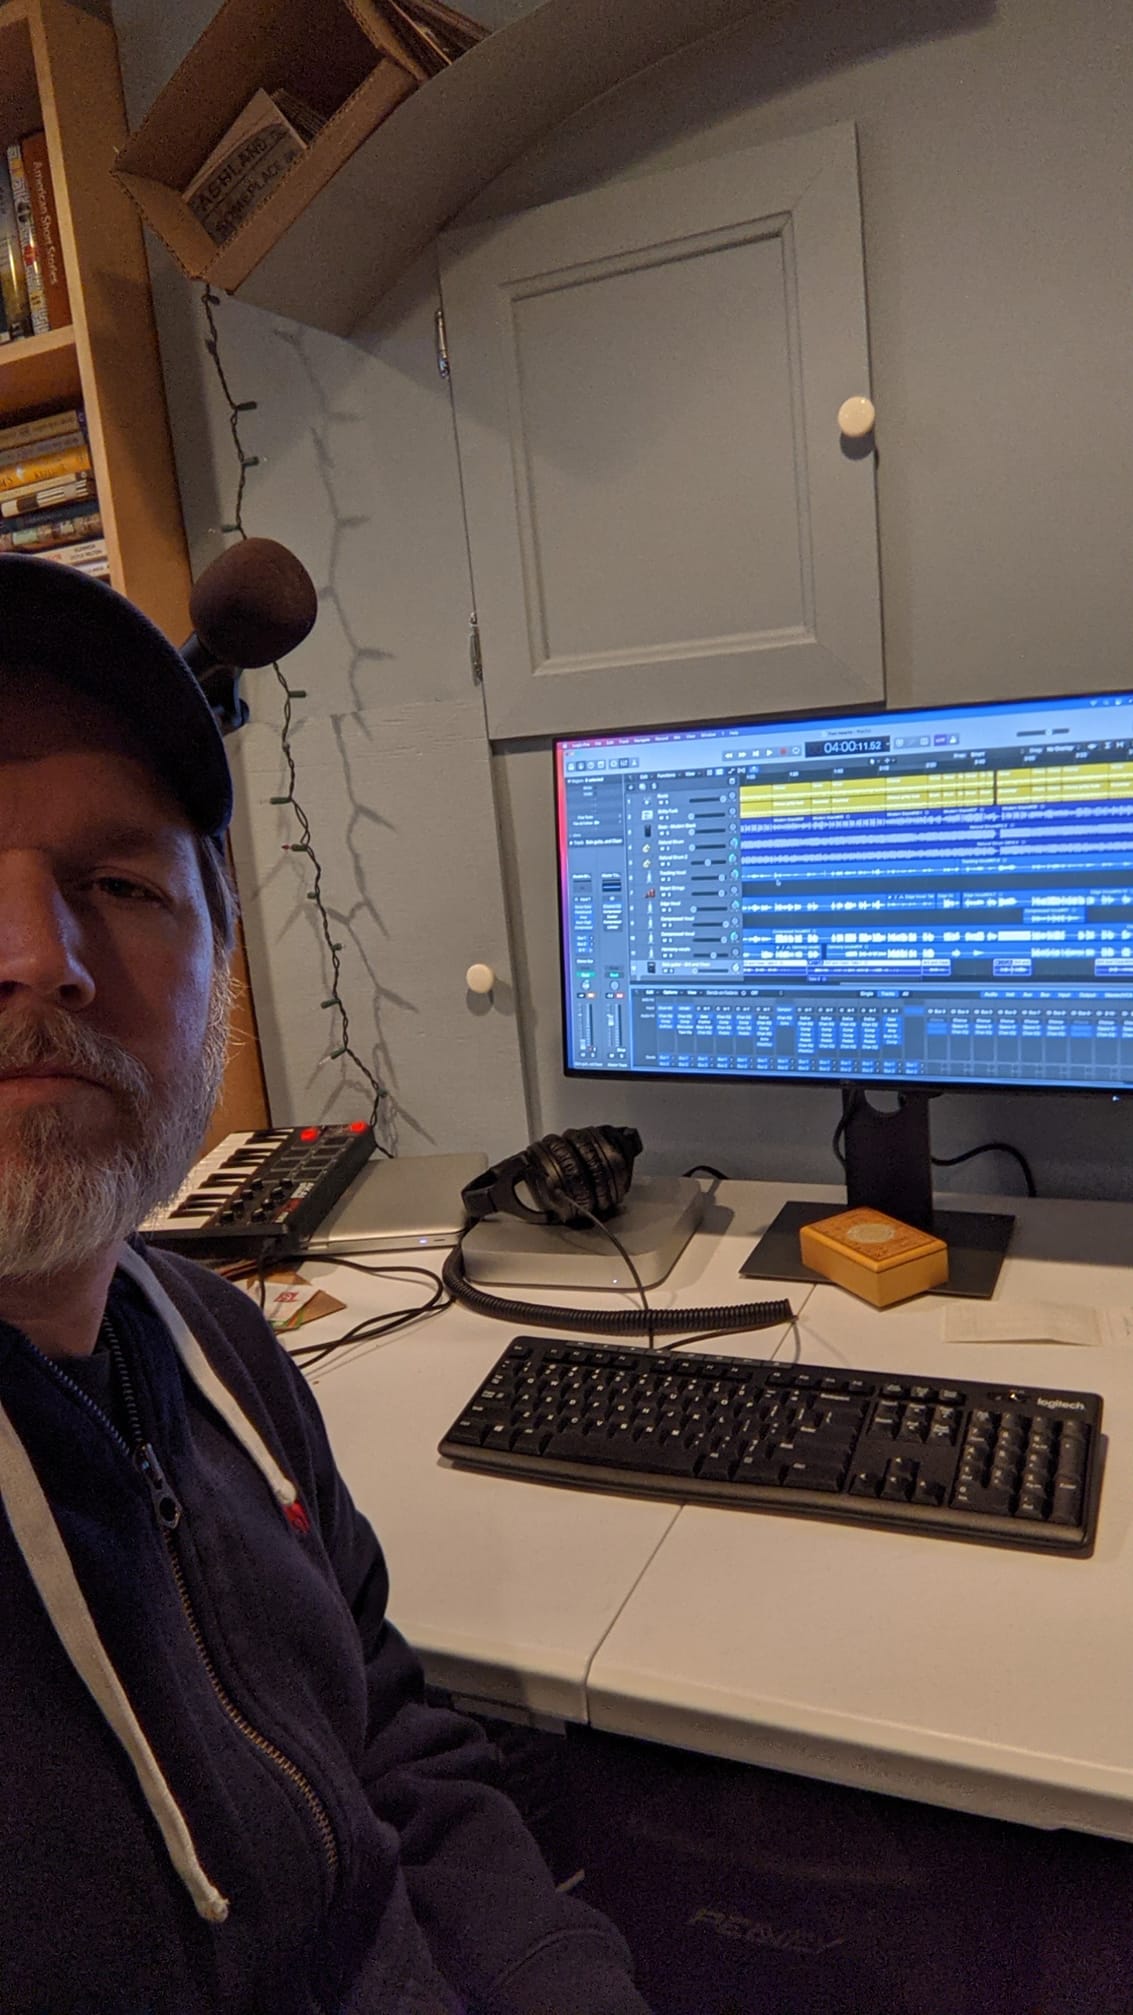 A selfie of the author in front of a computer with music editing software visible on it.